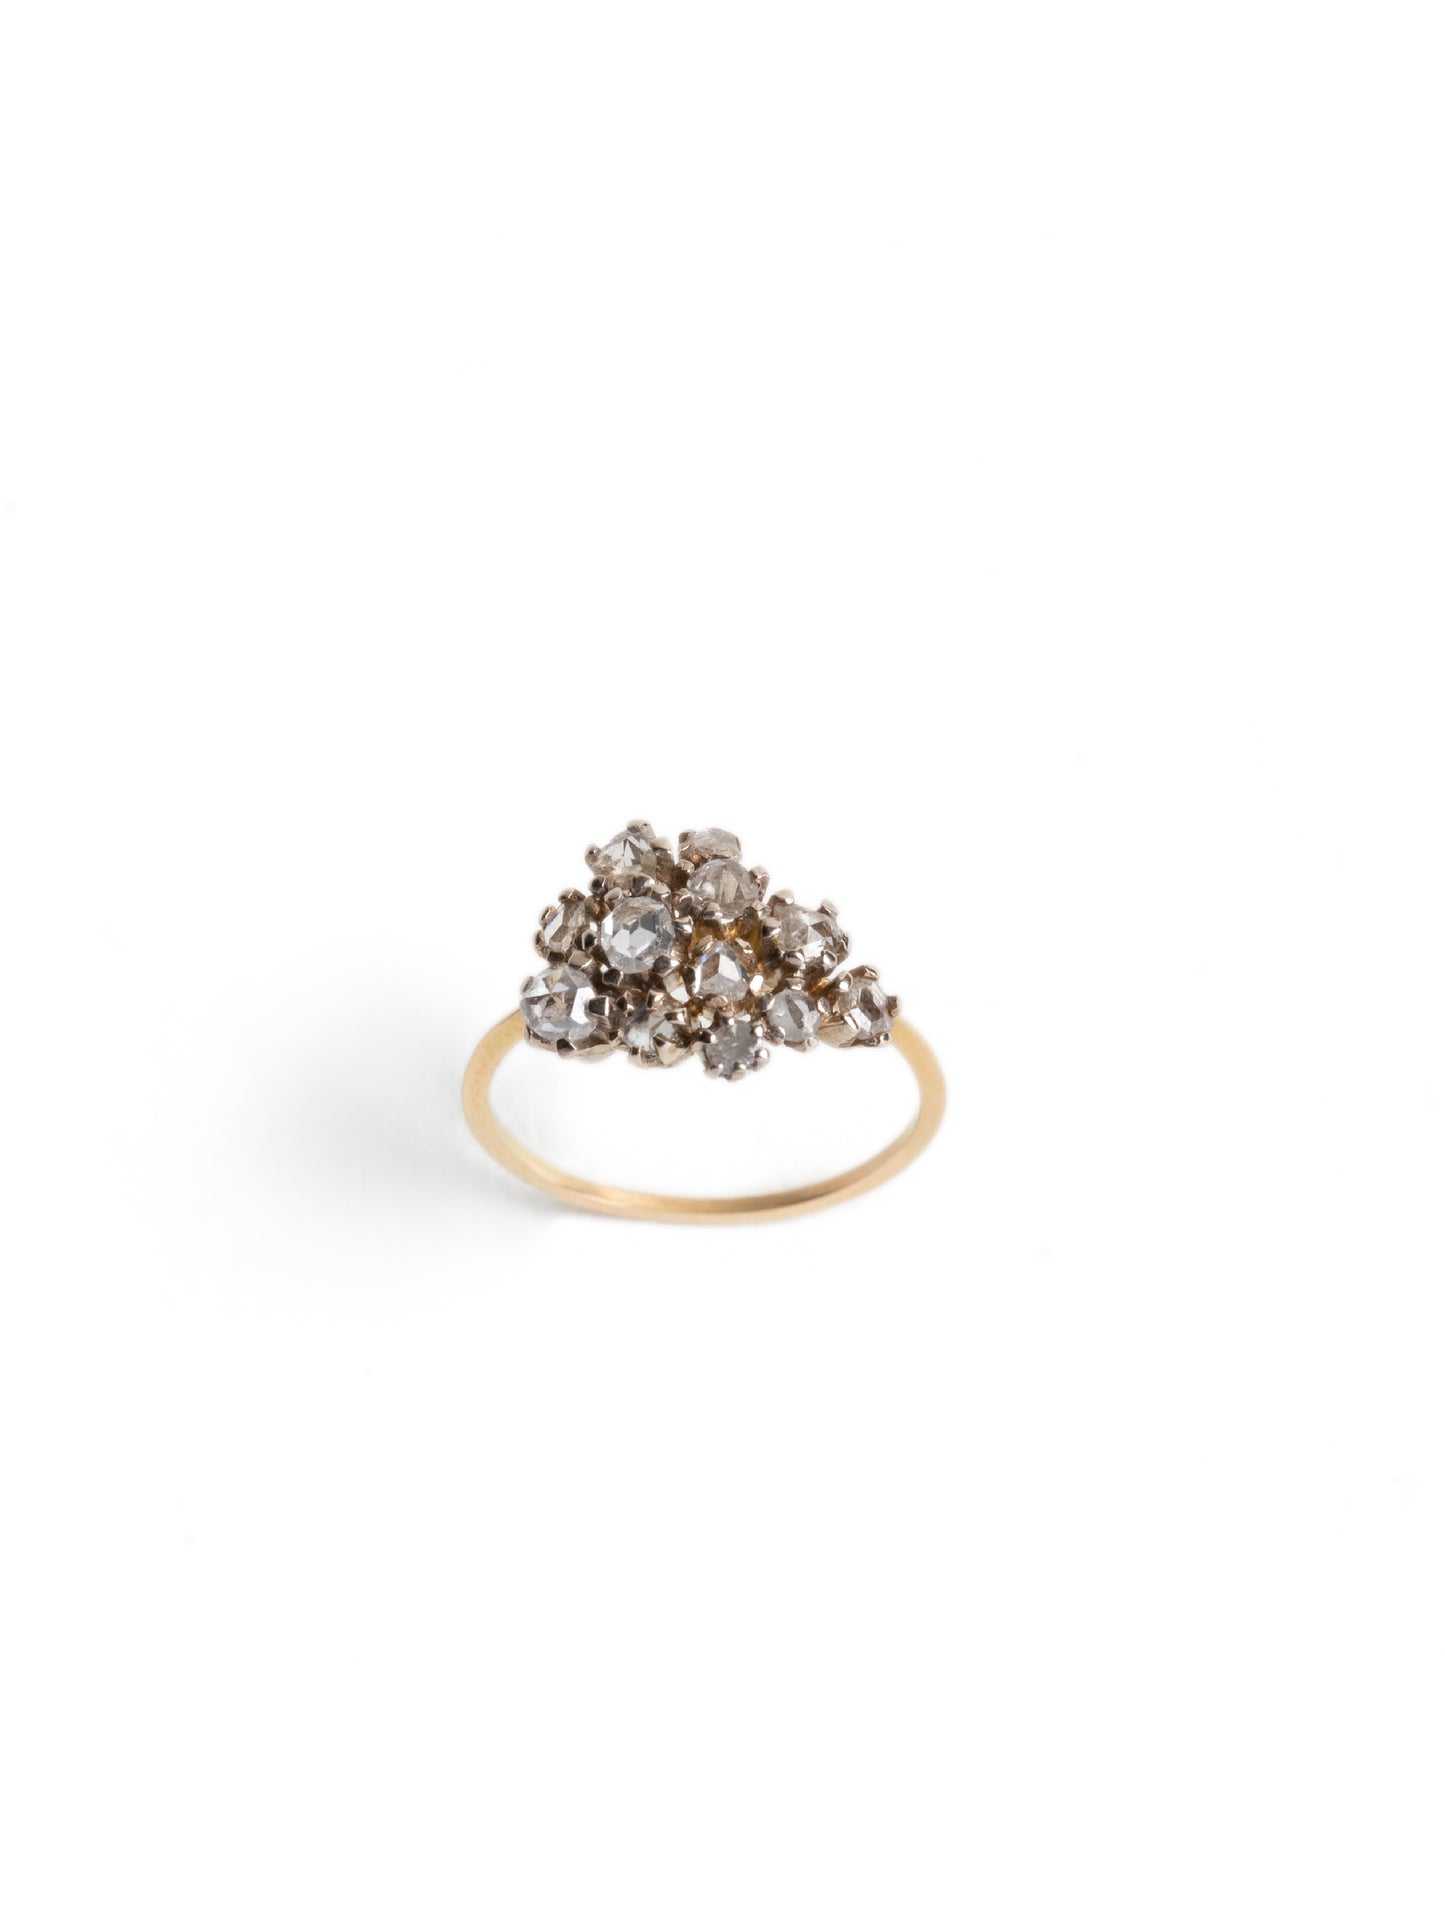 GOLD RING WITH 12 DIAMONDS